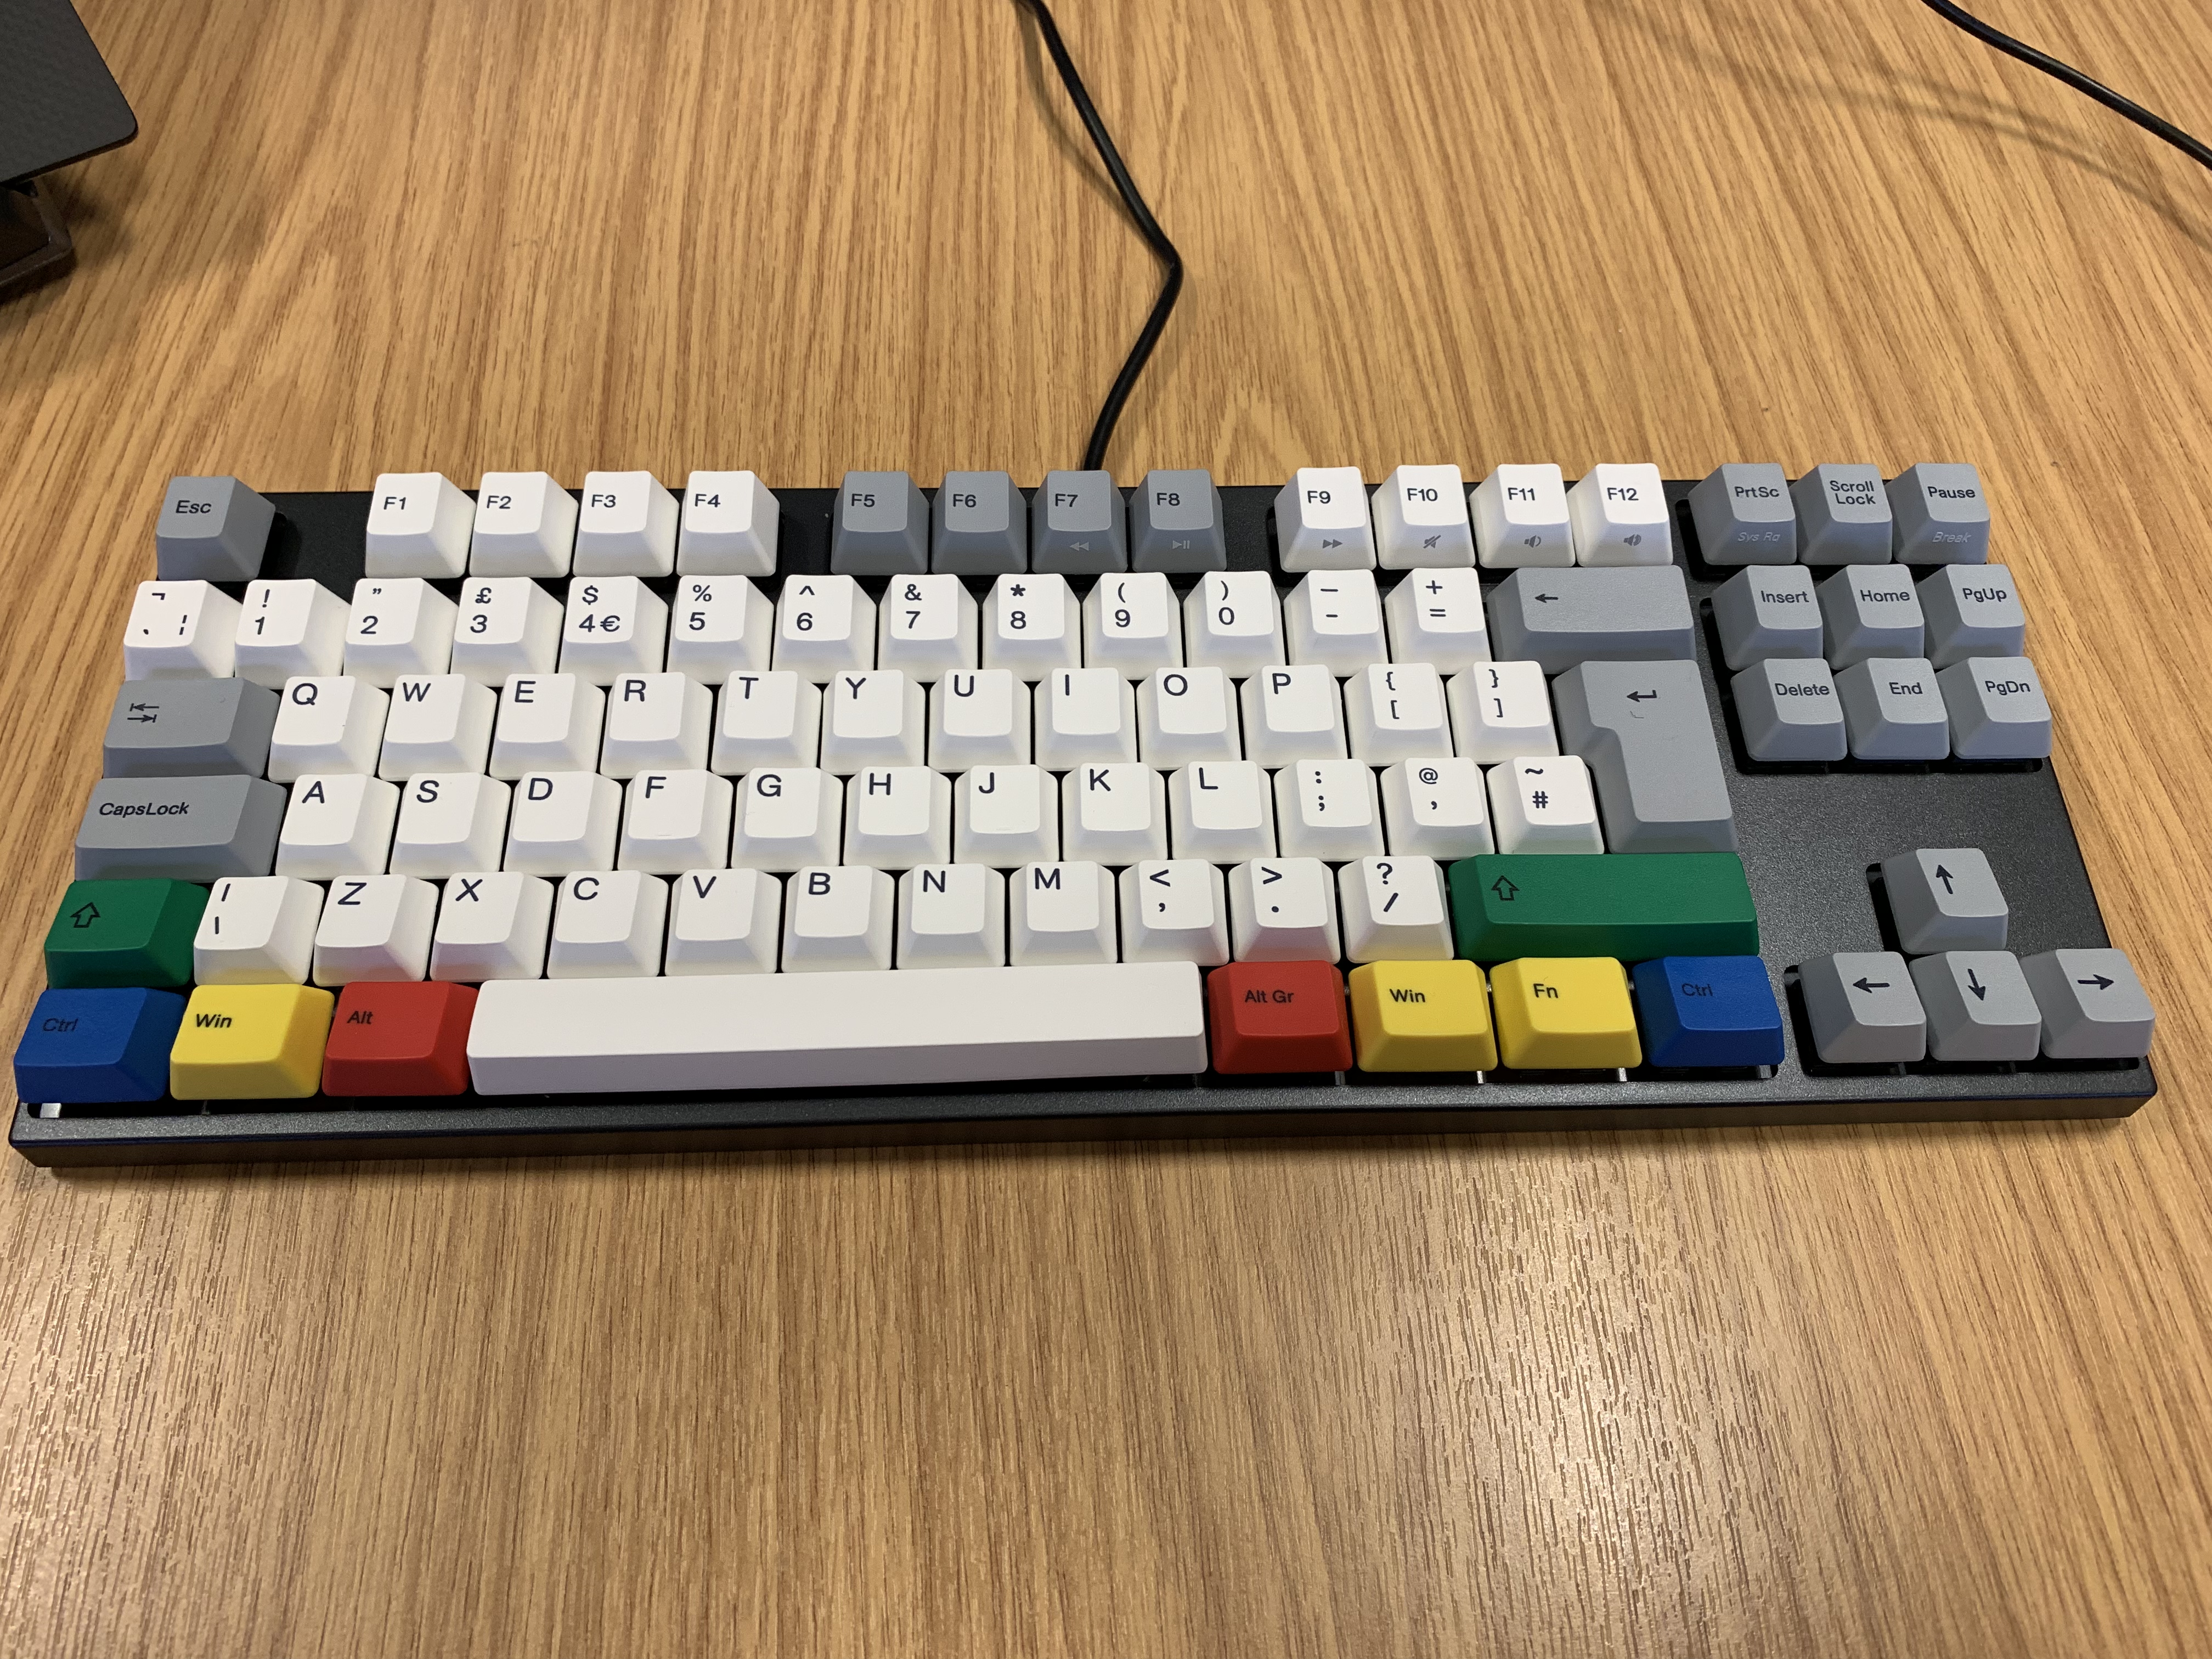 A Varmillo Keyboard with Cherry MX Clears